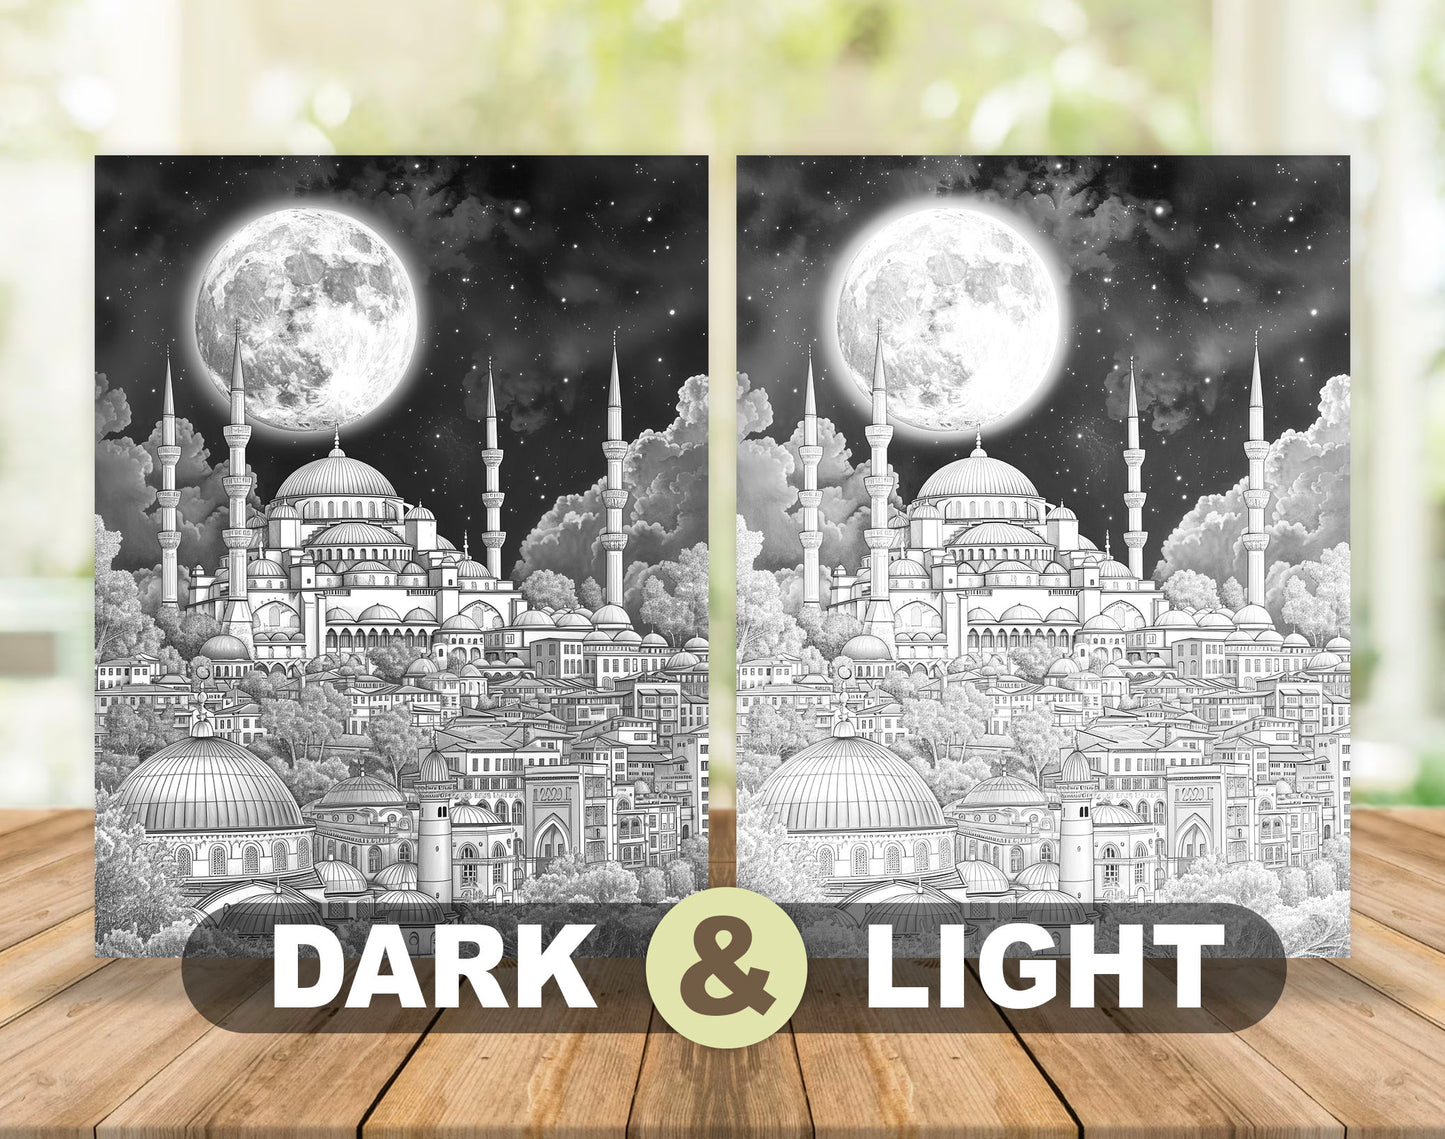 50 Moon Night Grayscale Coloring Pages - Instant Download - Printable PDF Dark/Light